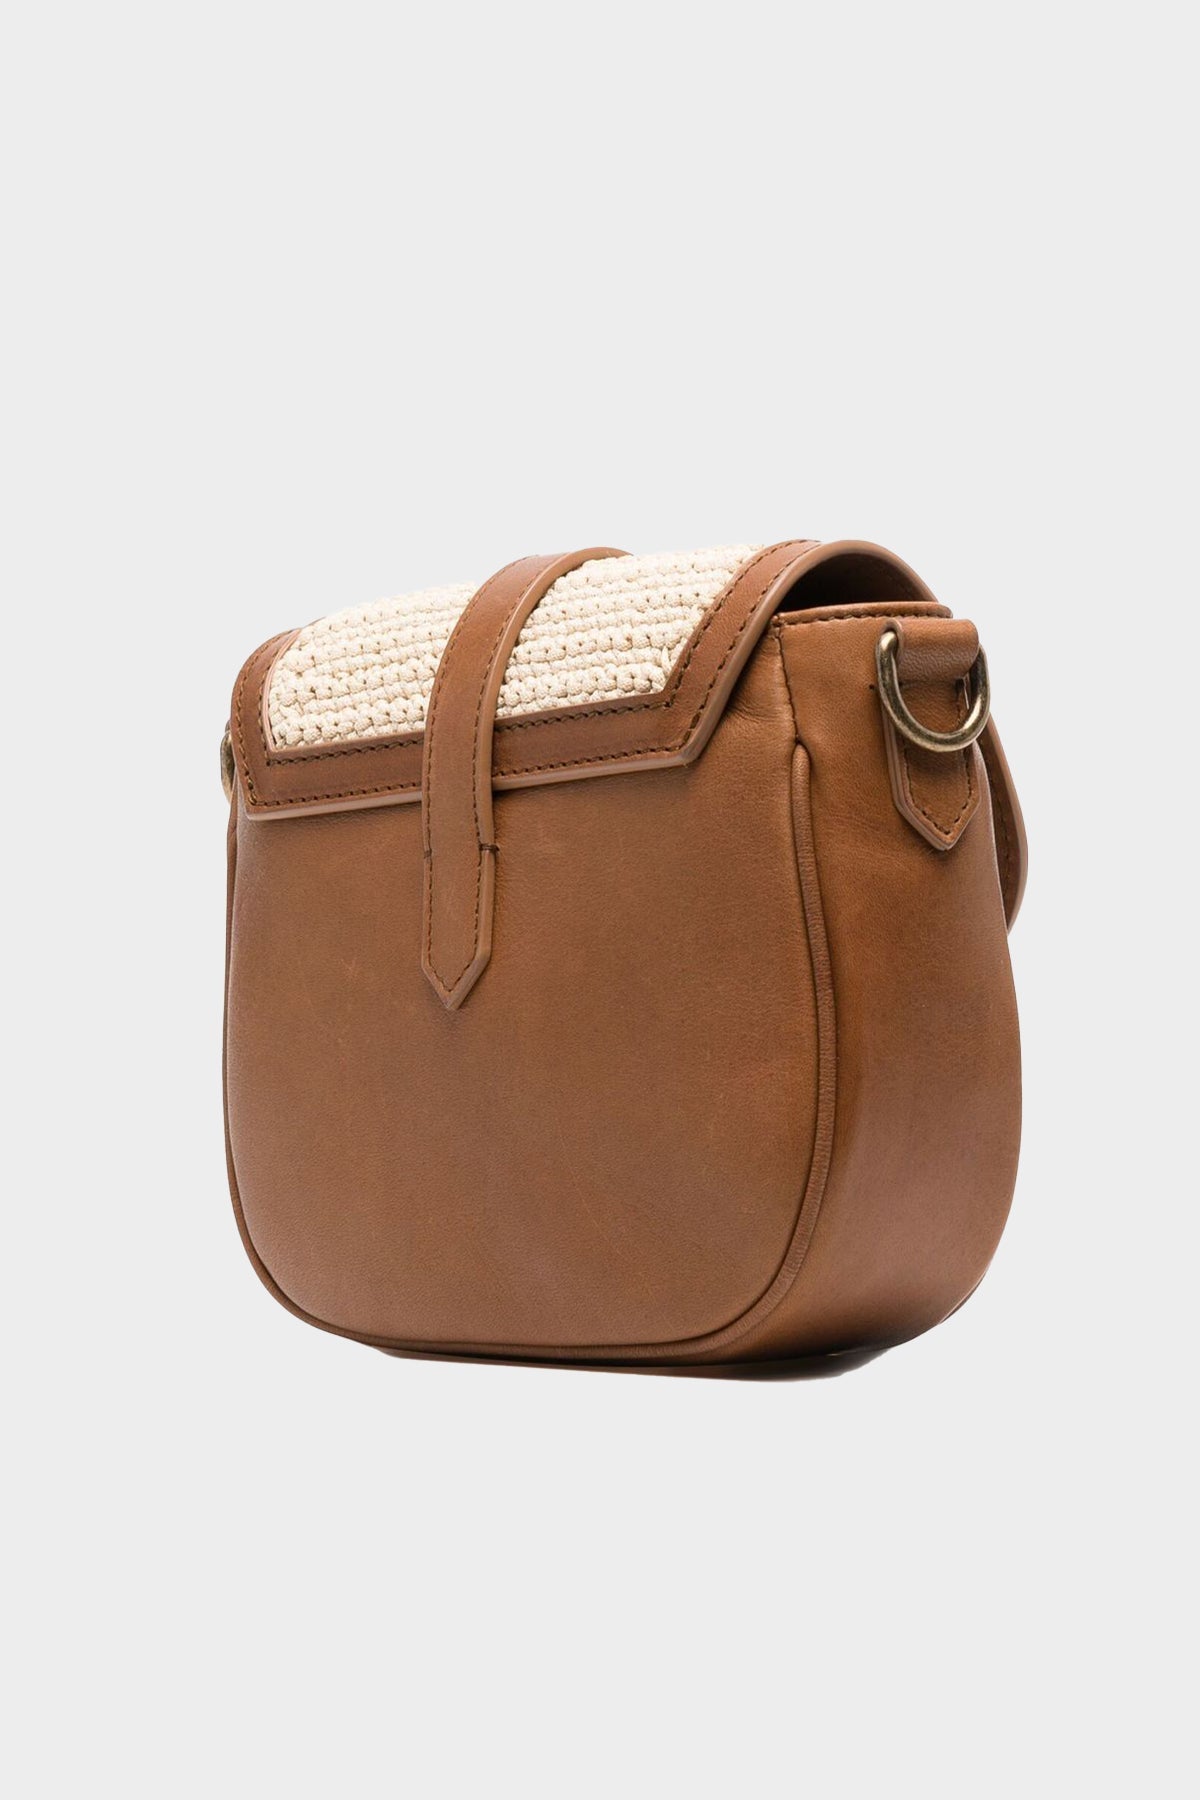 Women's Italian Leather & Raffia Crossbody in Natural by Quince